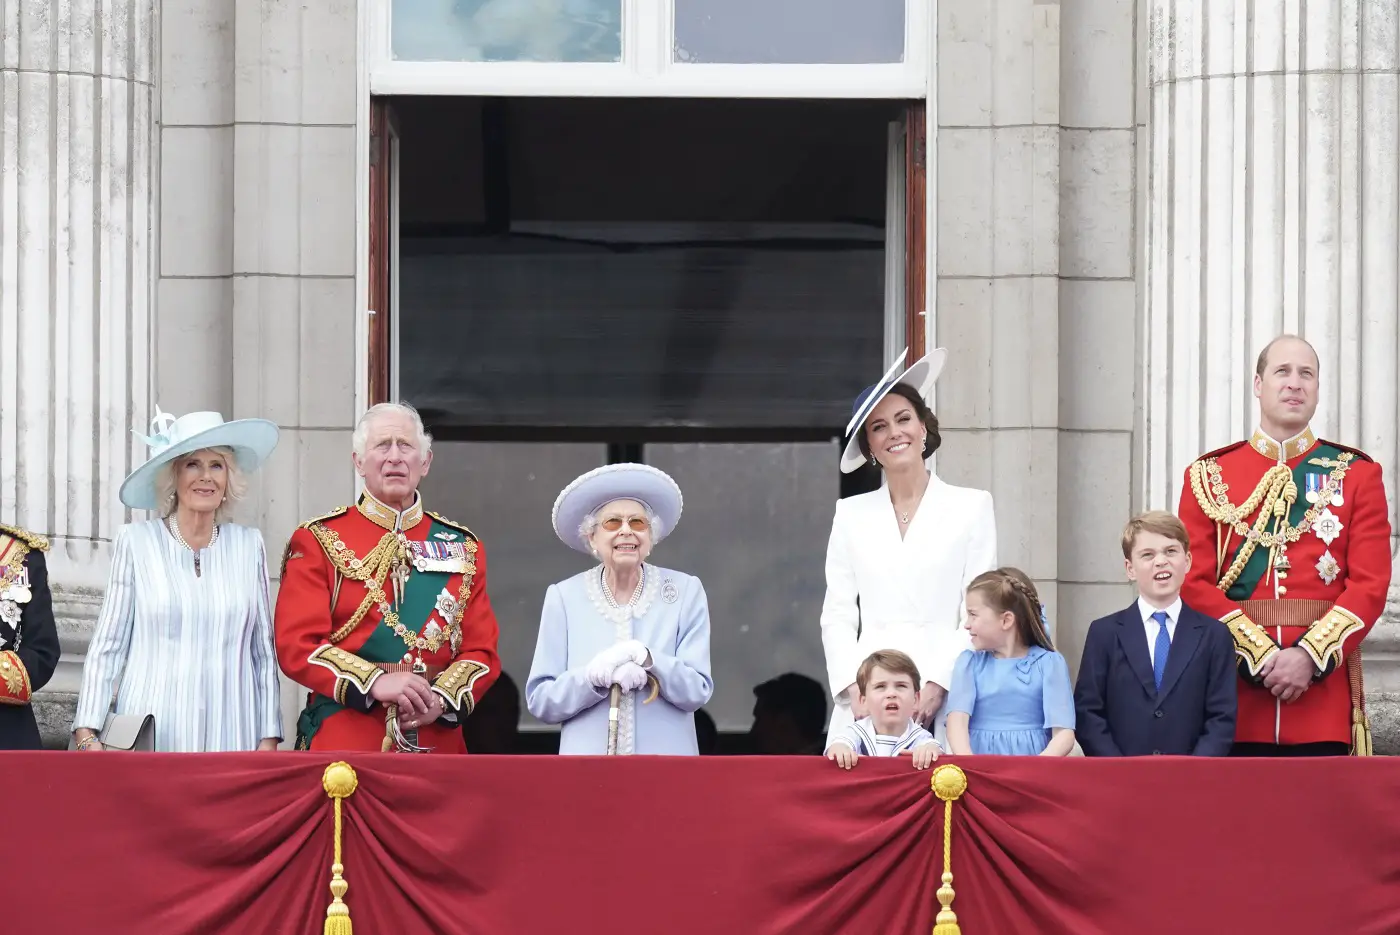 The British Royal Family is going through a historical change. After the demise of Queen Elizabeth II on September 08, 2022